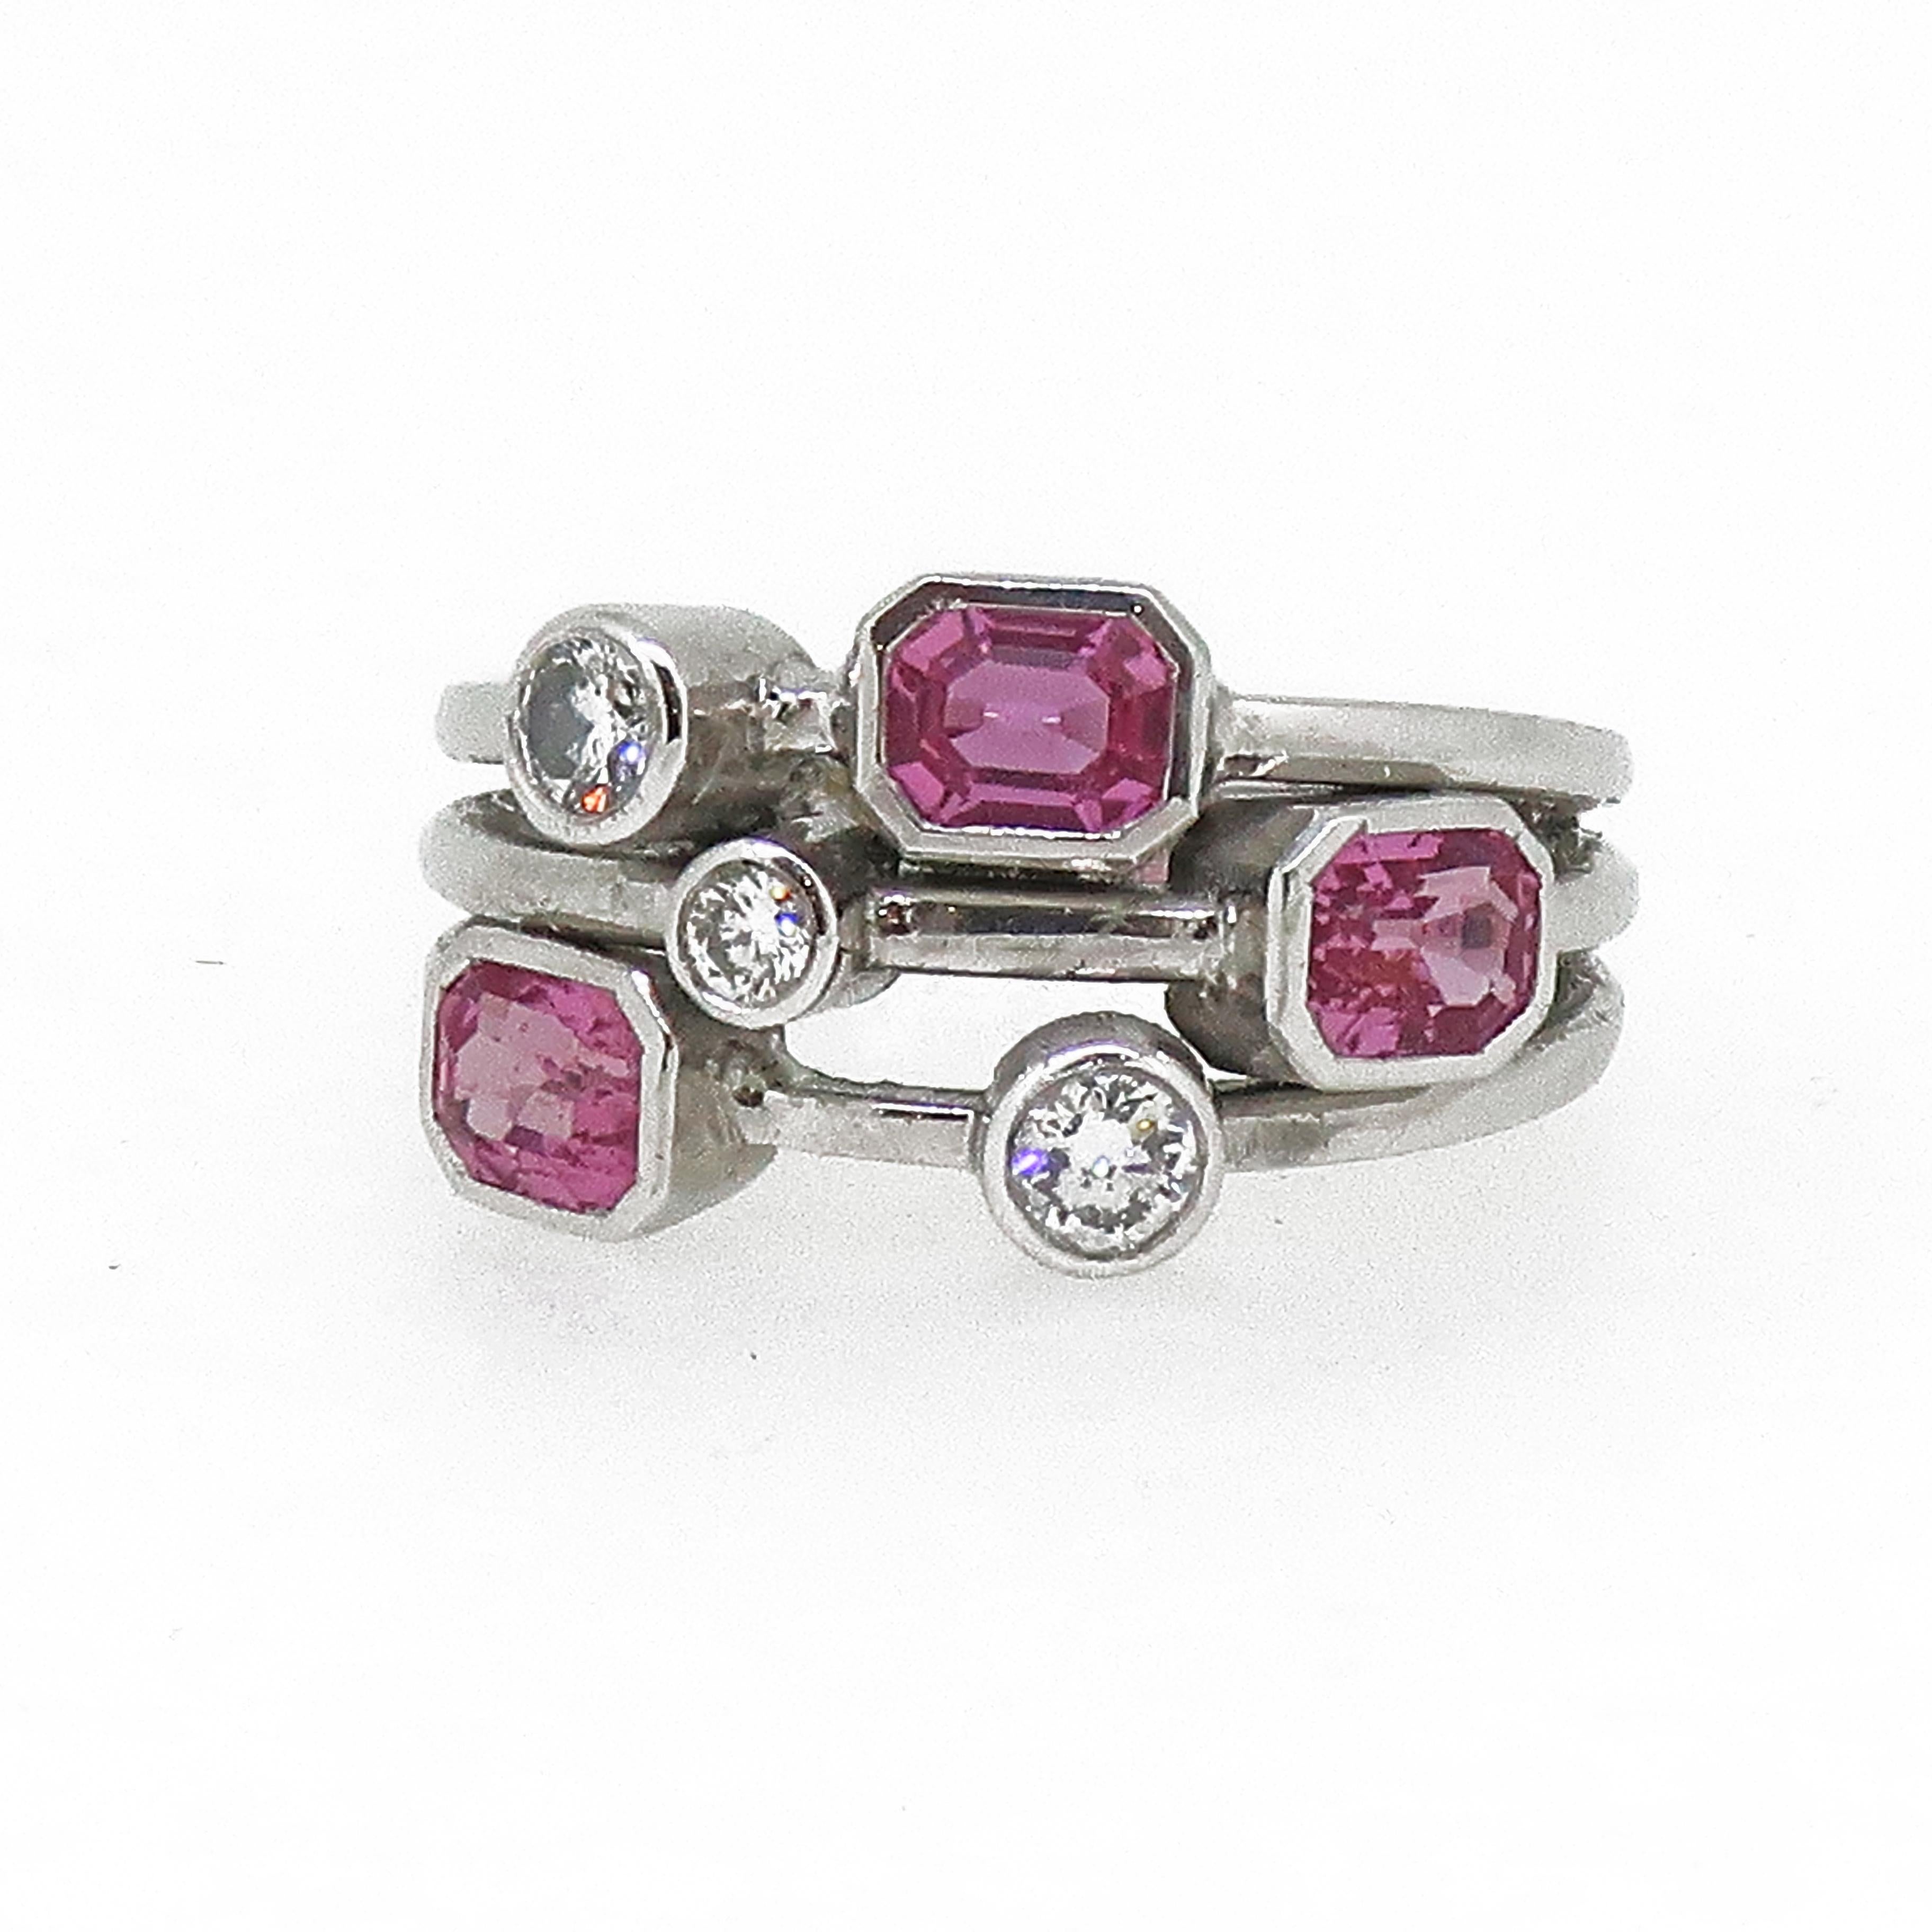 Pink Sapphire & Diamond Cluster Ring 18 Karat White Gold

A unique abstract pink sapphire and diamond cluster ring. Consisting of three emerald cut pink sapphires and three brilliant cut diamonds, all set in individual rub over settings spread out